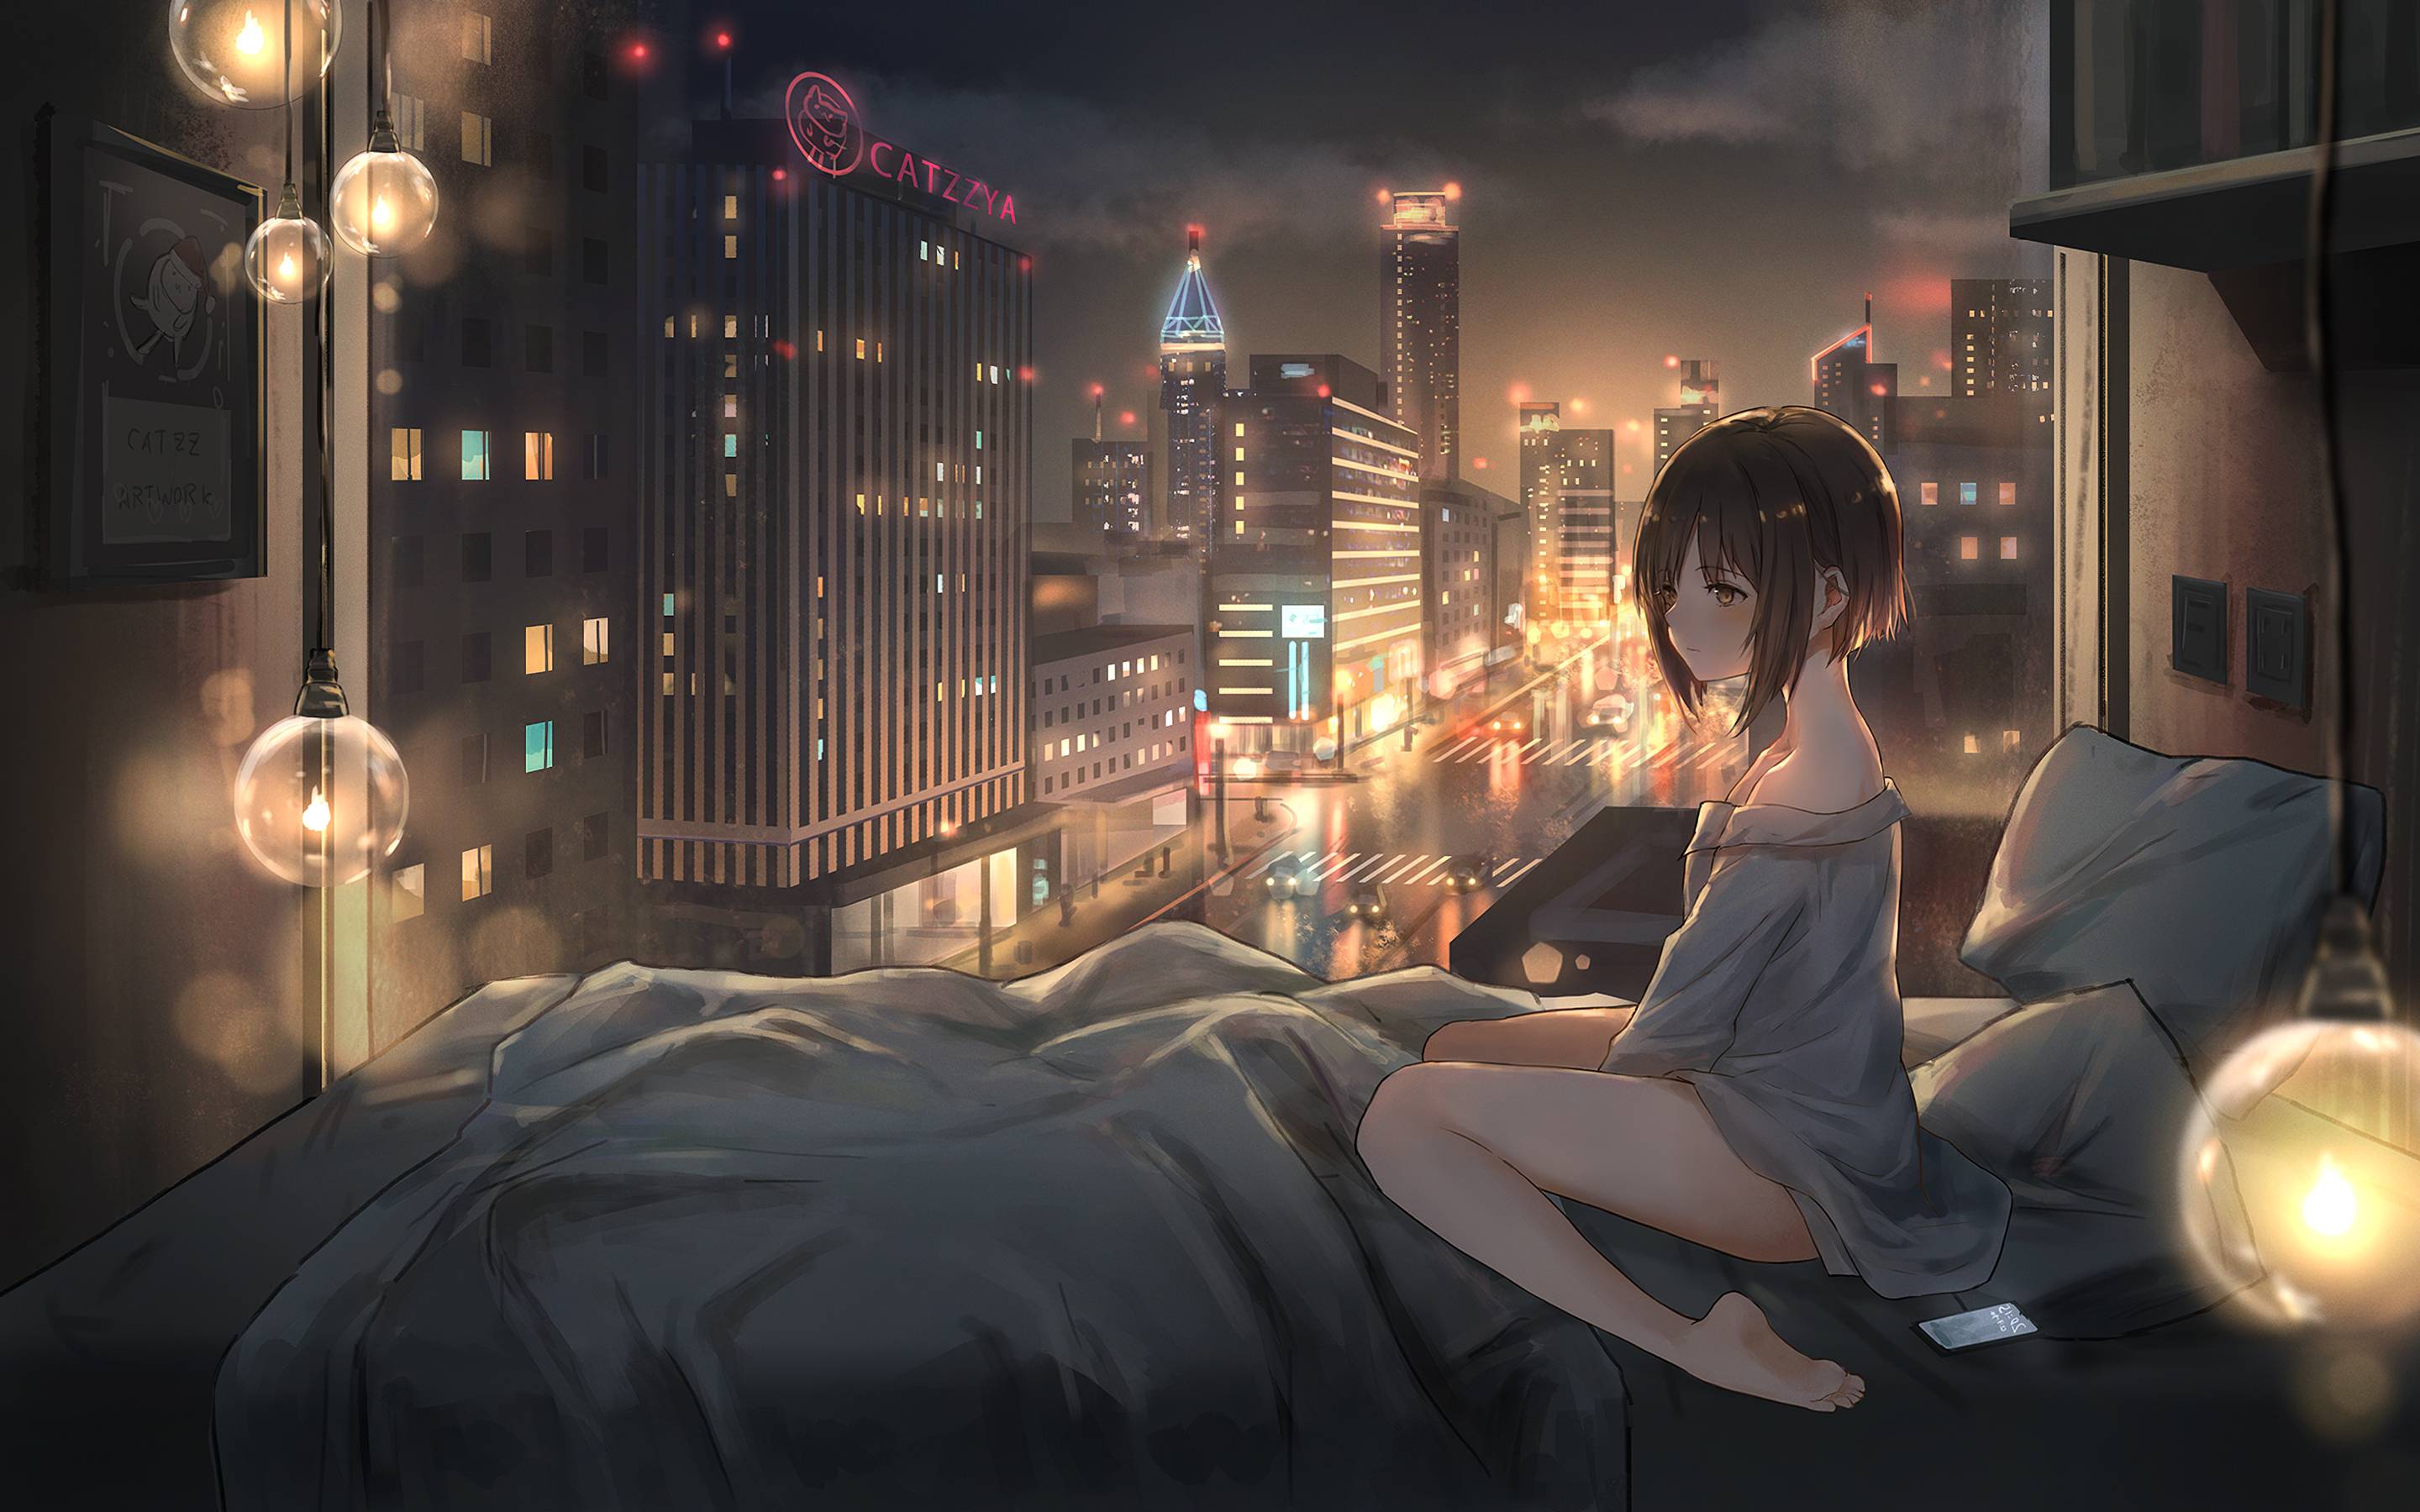 A girl sitting on the bed in the night city wallpaper 1920x1200 - Anime city